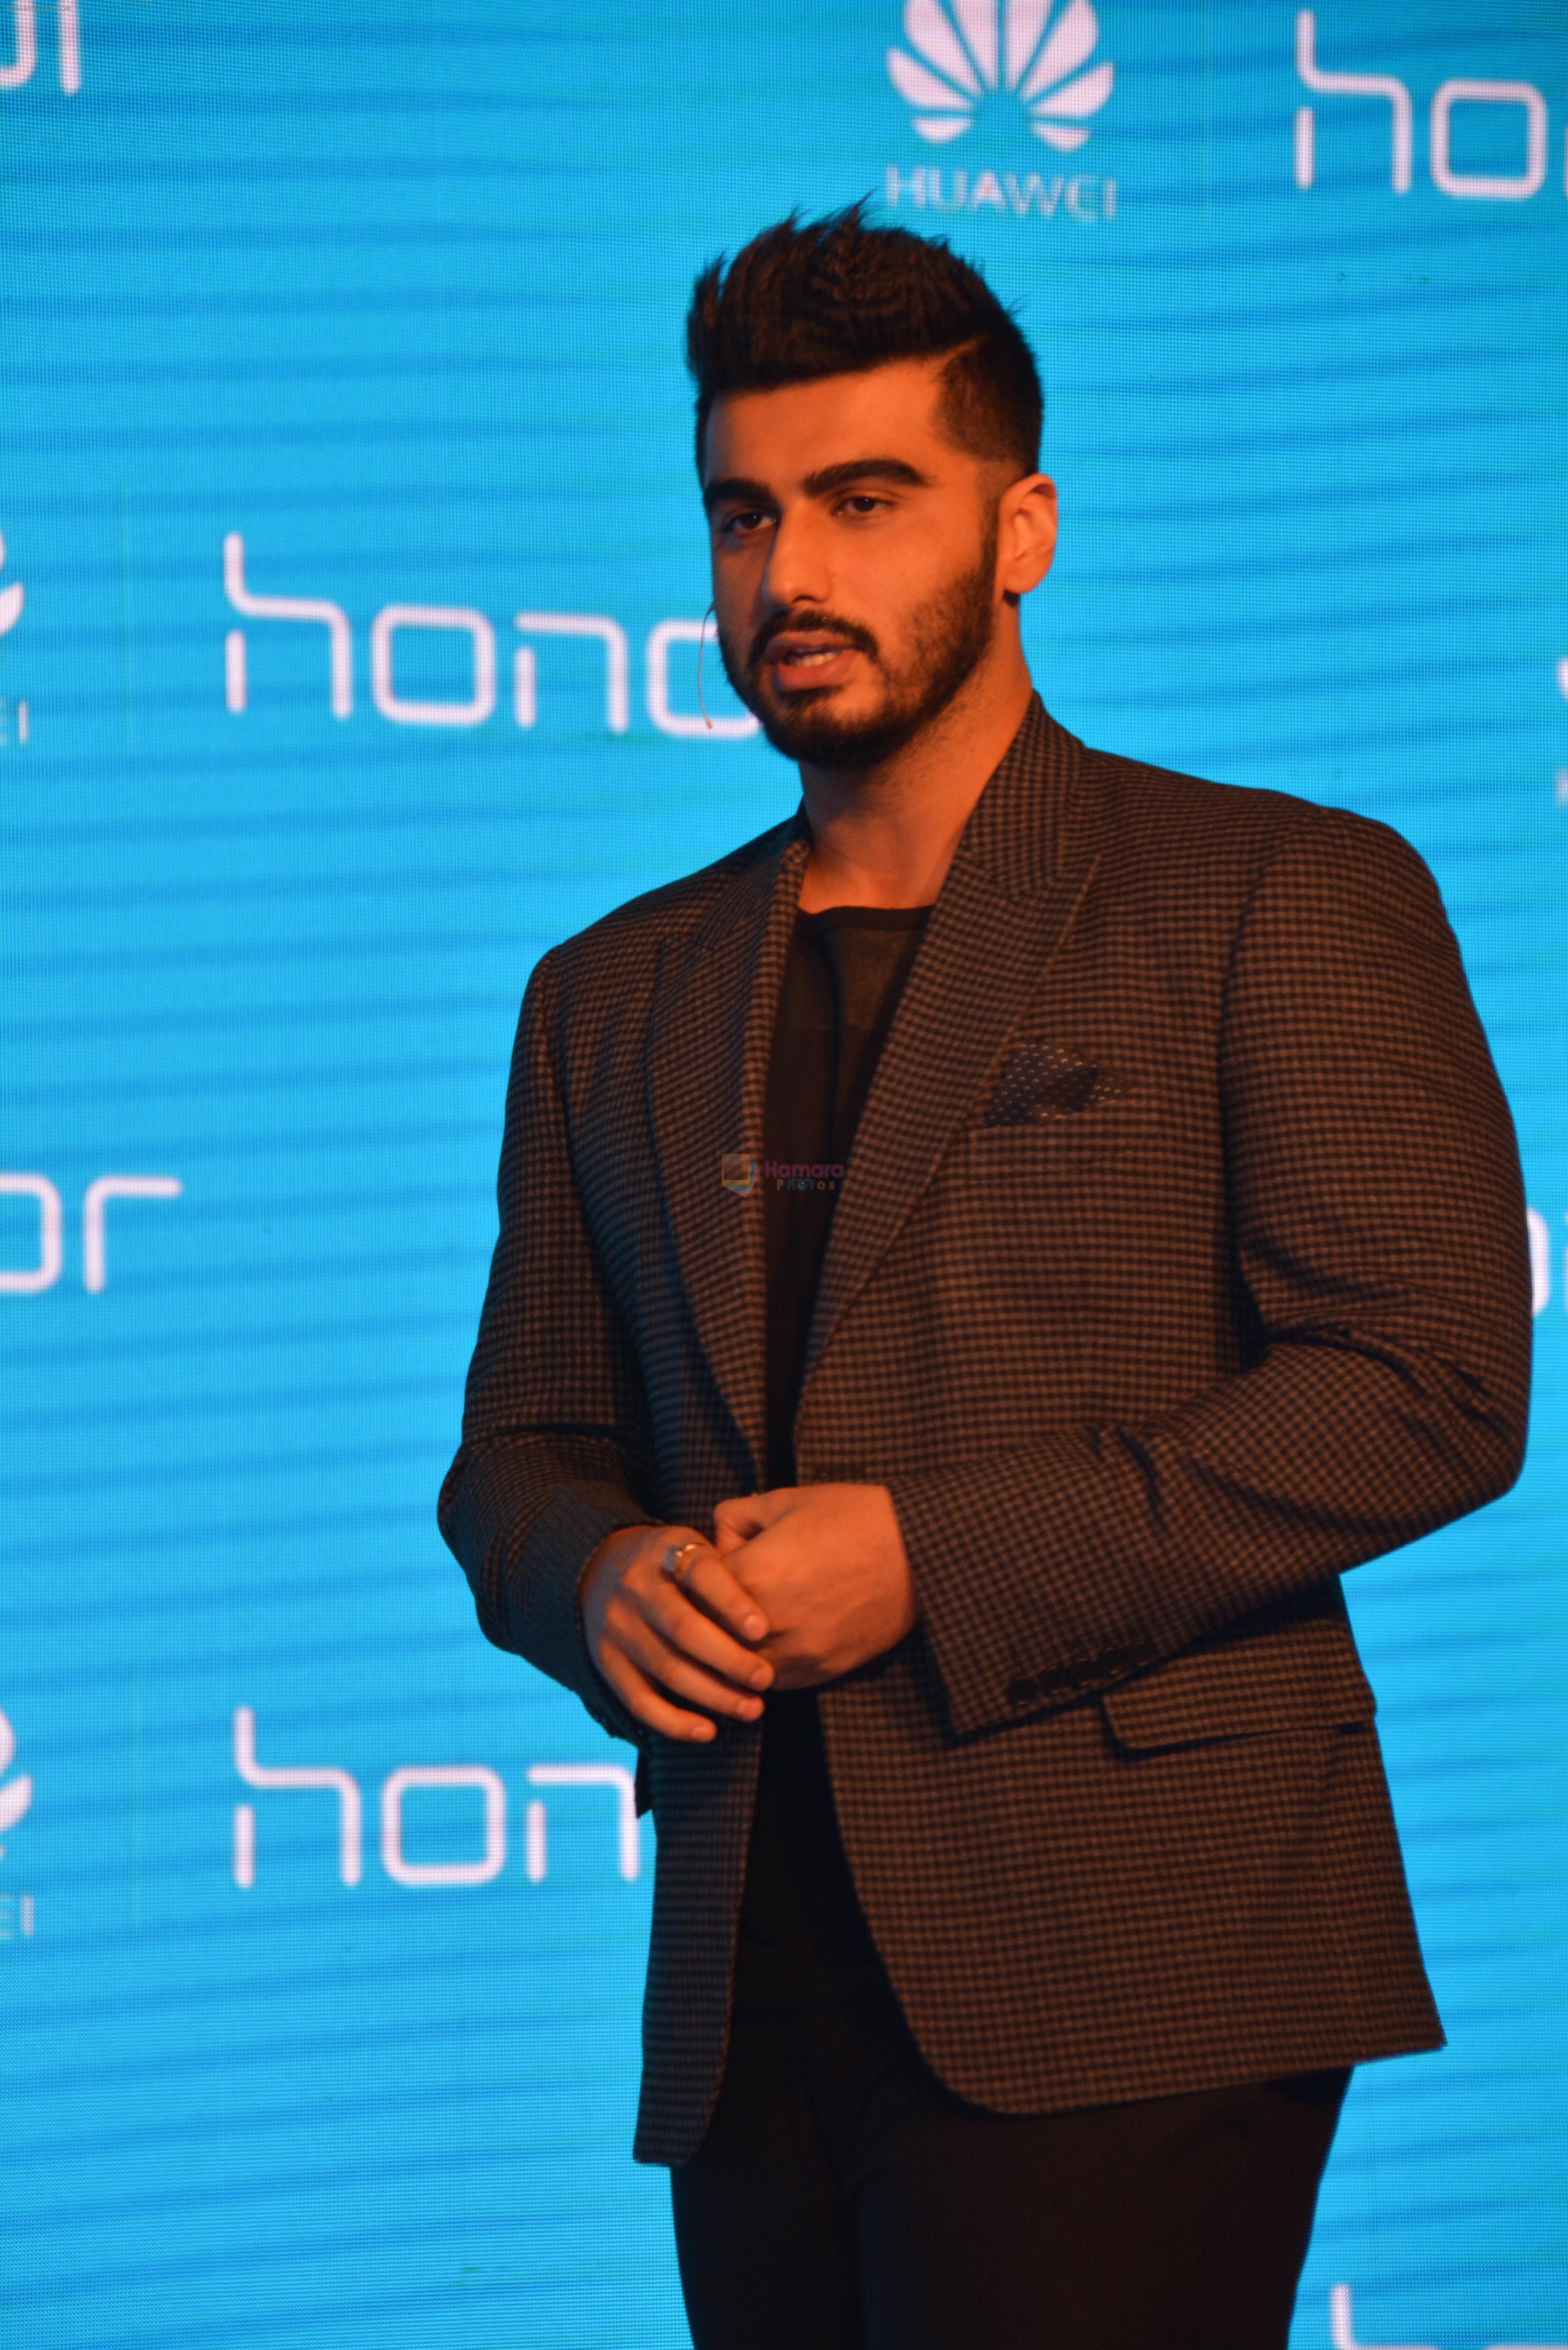 Arjun Kapoor launch honour 6 plus and honor  4X smartphone at tajplace in new delhi on 24th March 2015